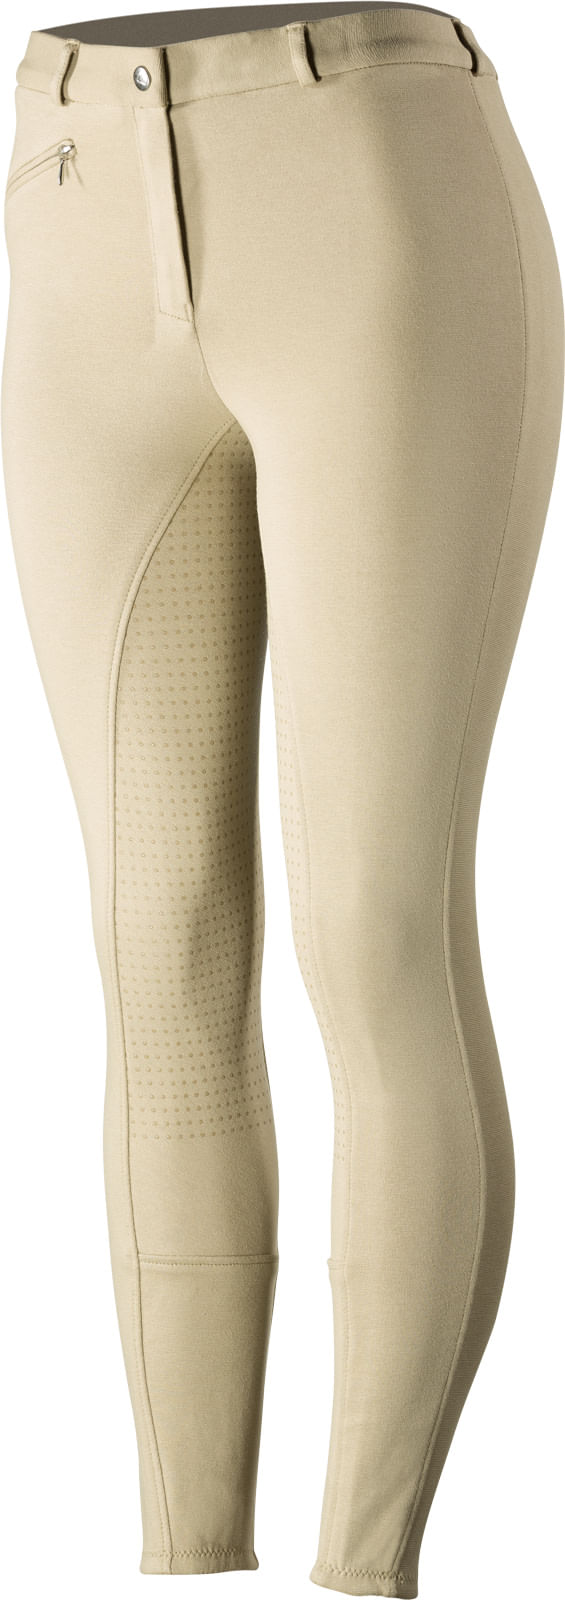 Color Details about  / Horze Women/'S Active Silicone Grip Full Seat Breeches Tan 36277-Lbr